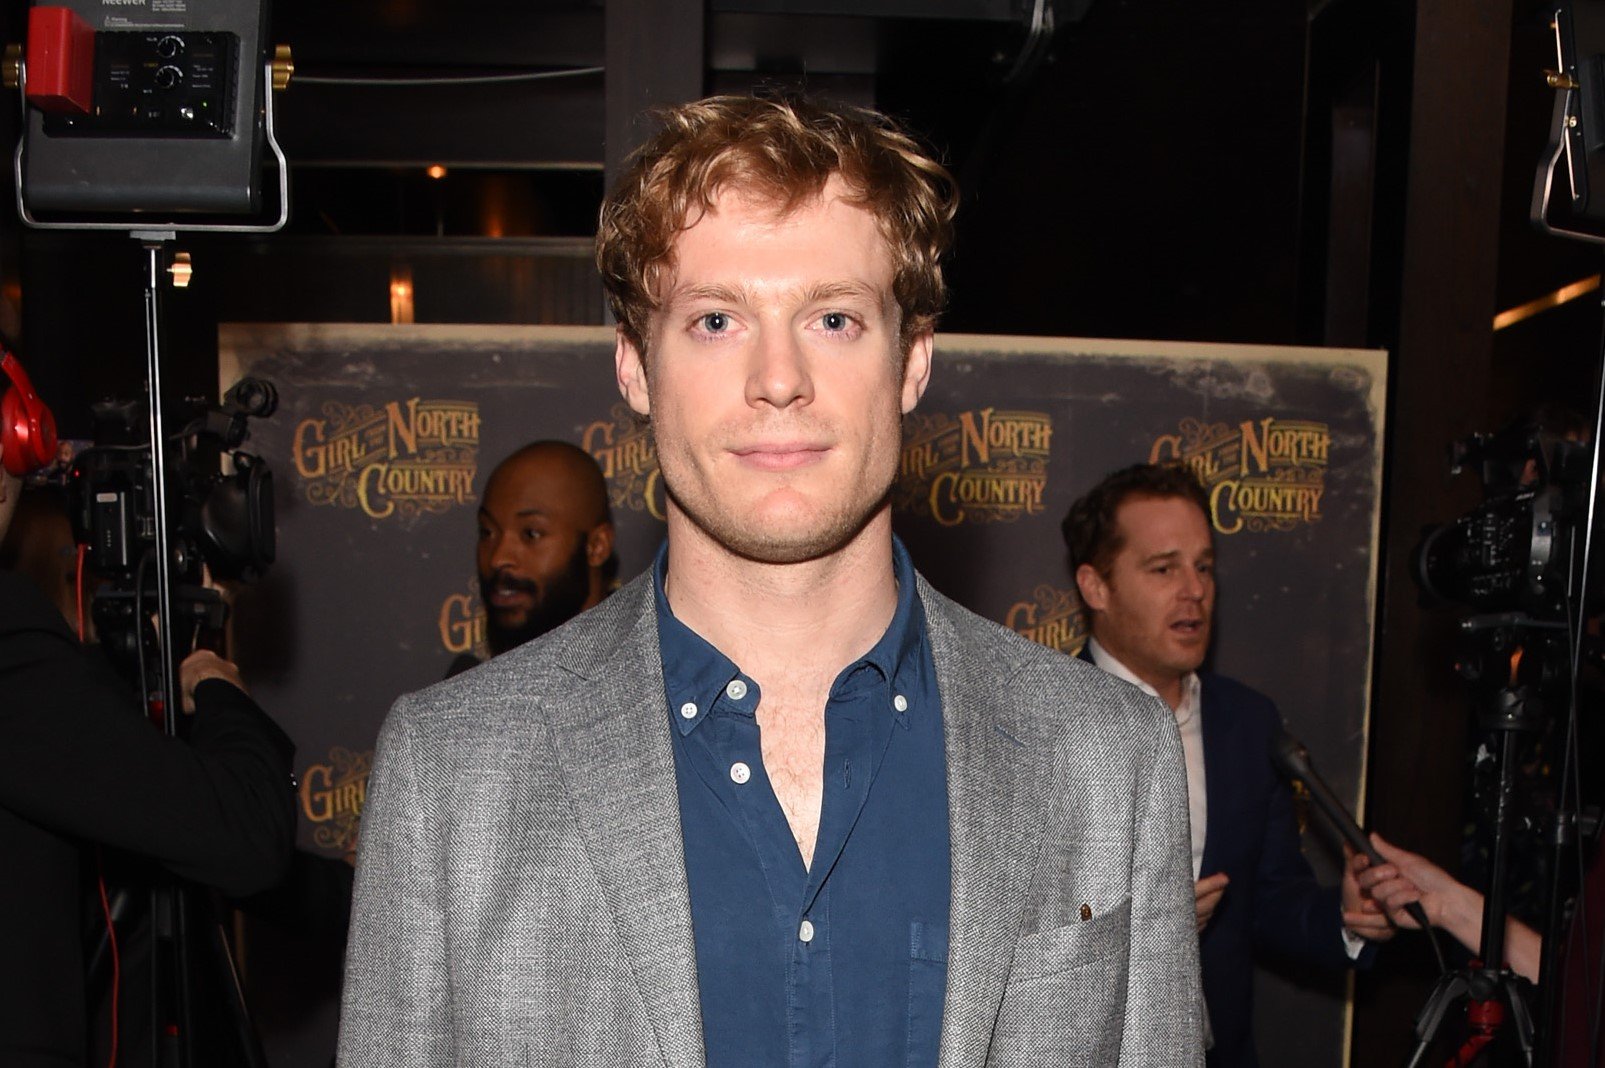 Sam Reid in a blue shirt and gray jacket at the 'Girl from the North Country' afterparty